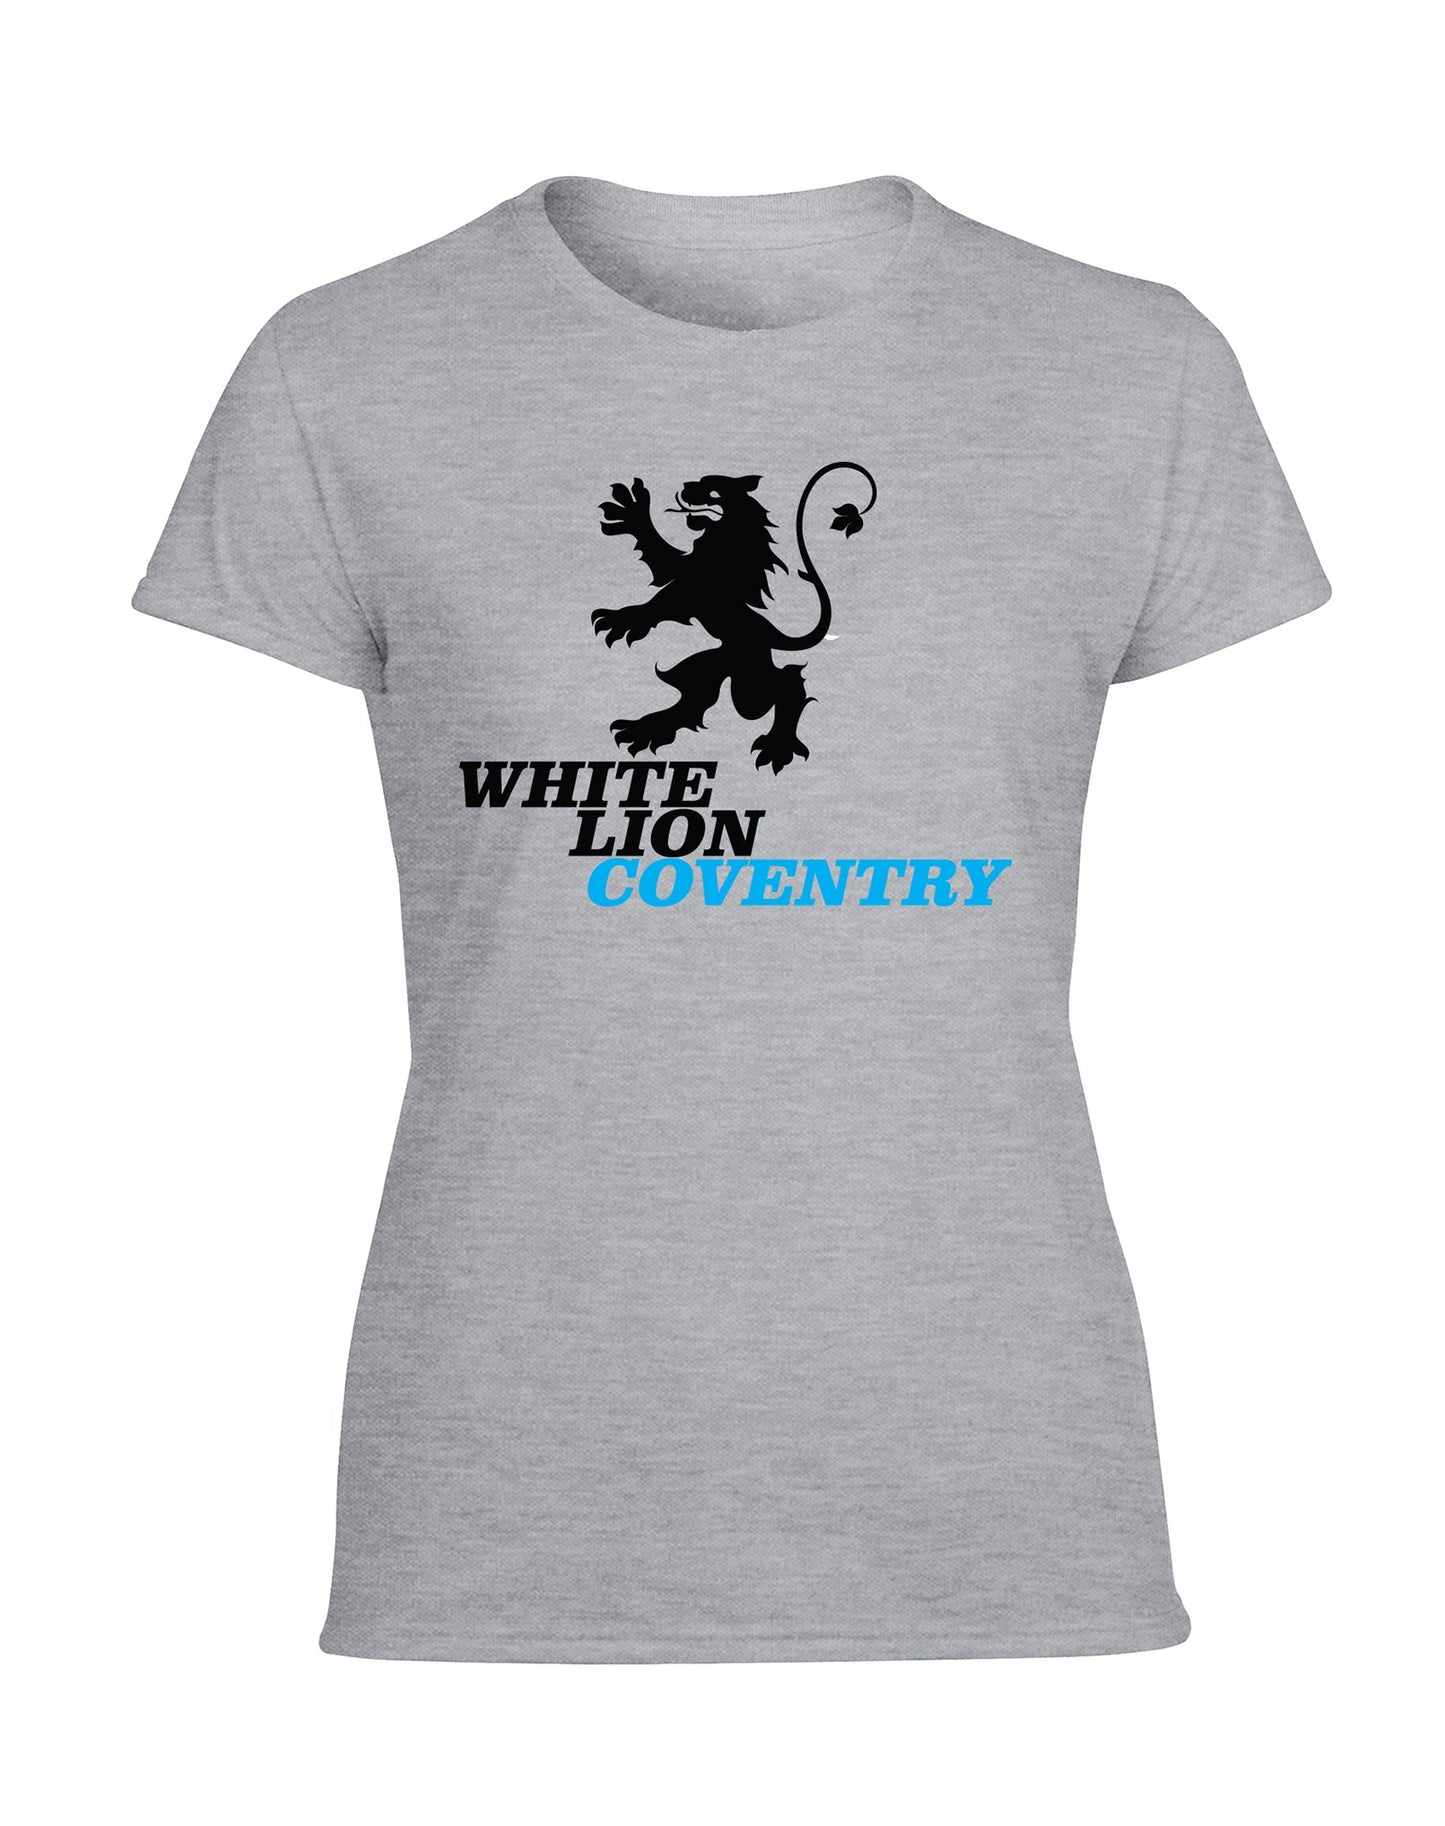 White Lion Coventry ladies fit t-shirt - various colours - Dirty Stop Outs